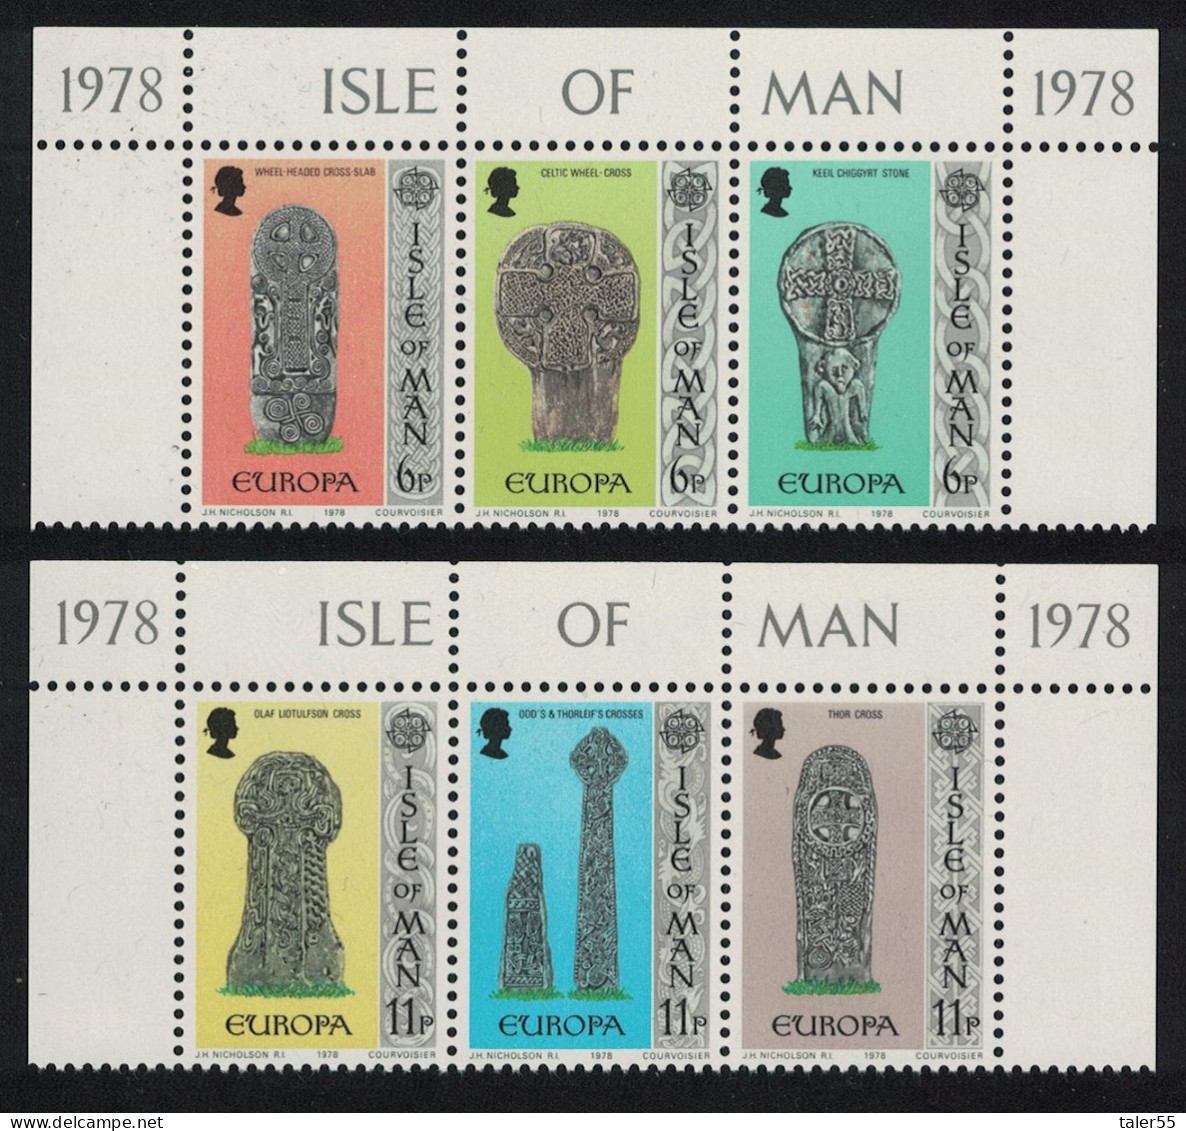 Isle Of Man Europa Celtic And Norse Crosses 6v Top Strips 1978 MNH SG#133-138 Sc#133a+136a - Isola Di Man